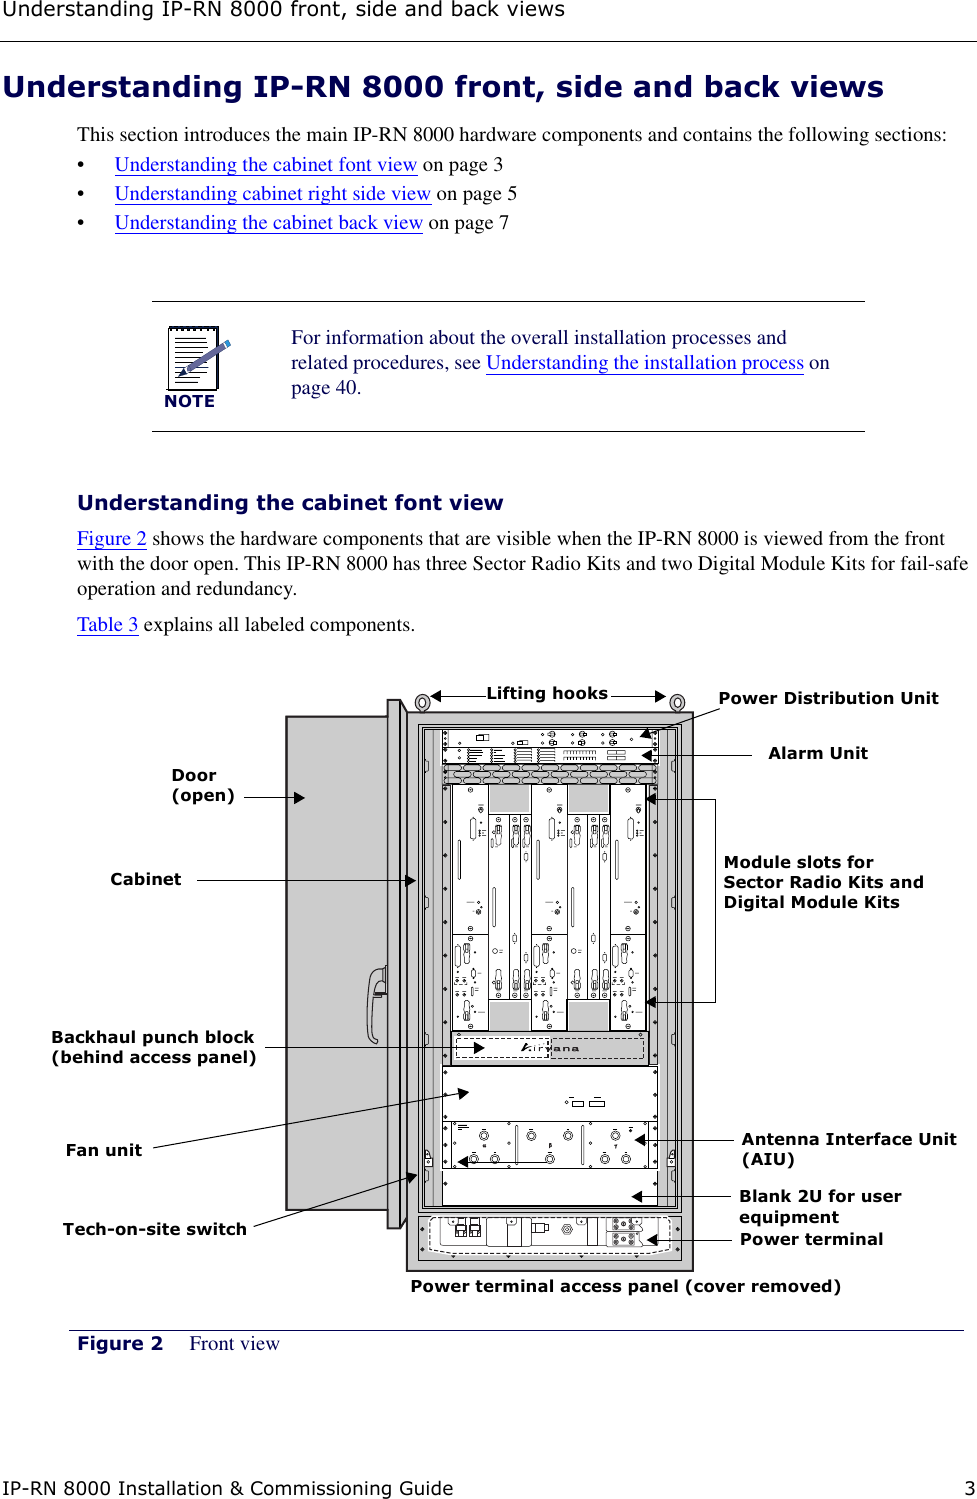 Understanding IP-RN 8000 front, side and back viewsIP-RN 8000 Installation &amp; Commissioning Guide 3Understanding IP-RN 8000 front, side and back viewsThis section introduces the main IP-RN 8000 hardware components and contains the following sections:•Understanding the cabinet font view on page 3•Understanding cabinet right side view on page 5•Understanding the cabinet back view on page 7Understanding the cabinet font view Figure 2 shows the hardware components that are visible when the IP-RN 8000 is viewed from the front with the door open. This IP-RN 8000 has three Sector Radio Kits and two Digital Module Kits for fail-safe operation and redundancy. Table 3 explains all labeled components.Figure 2 Front viewNOTEFor information about the overall installation processes and related procedures, see Understanding the installation process on page 40.Lifting hooksAlarm UnitPower Distribution UnitBackhaul punch blockFan unit Antenna Interface UnitPower terminal access panel (cover removed)Tech-on-site switchDoor(behind access panel)(AIU)(open)Module slots for Sector Radio Kits andDigital Module KitsCabinetBlank 2U for userequipmentPower terminal